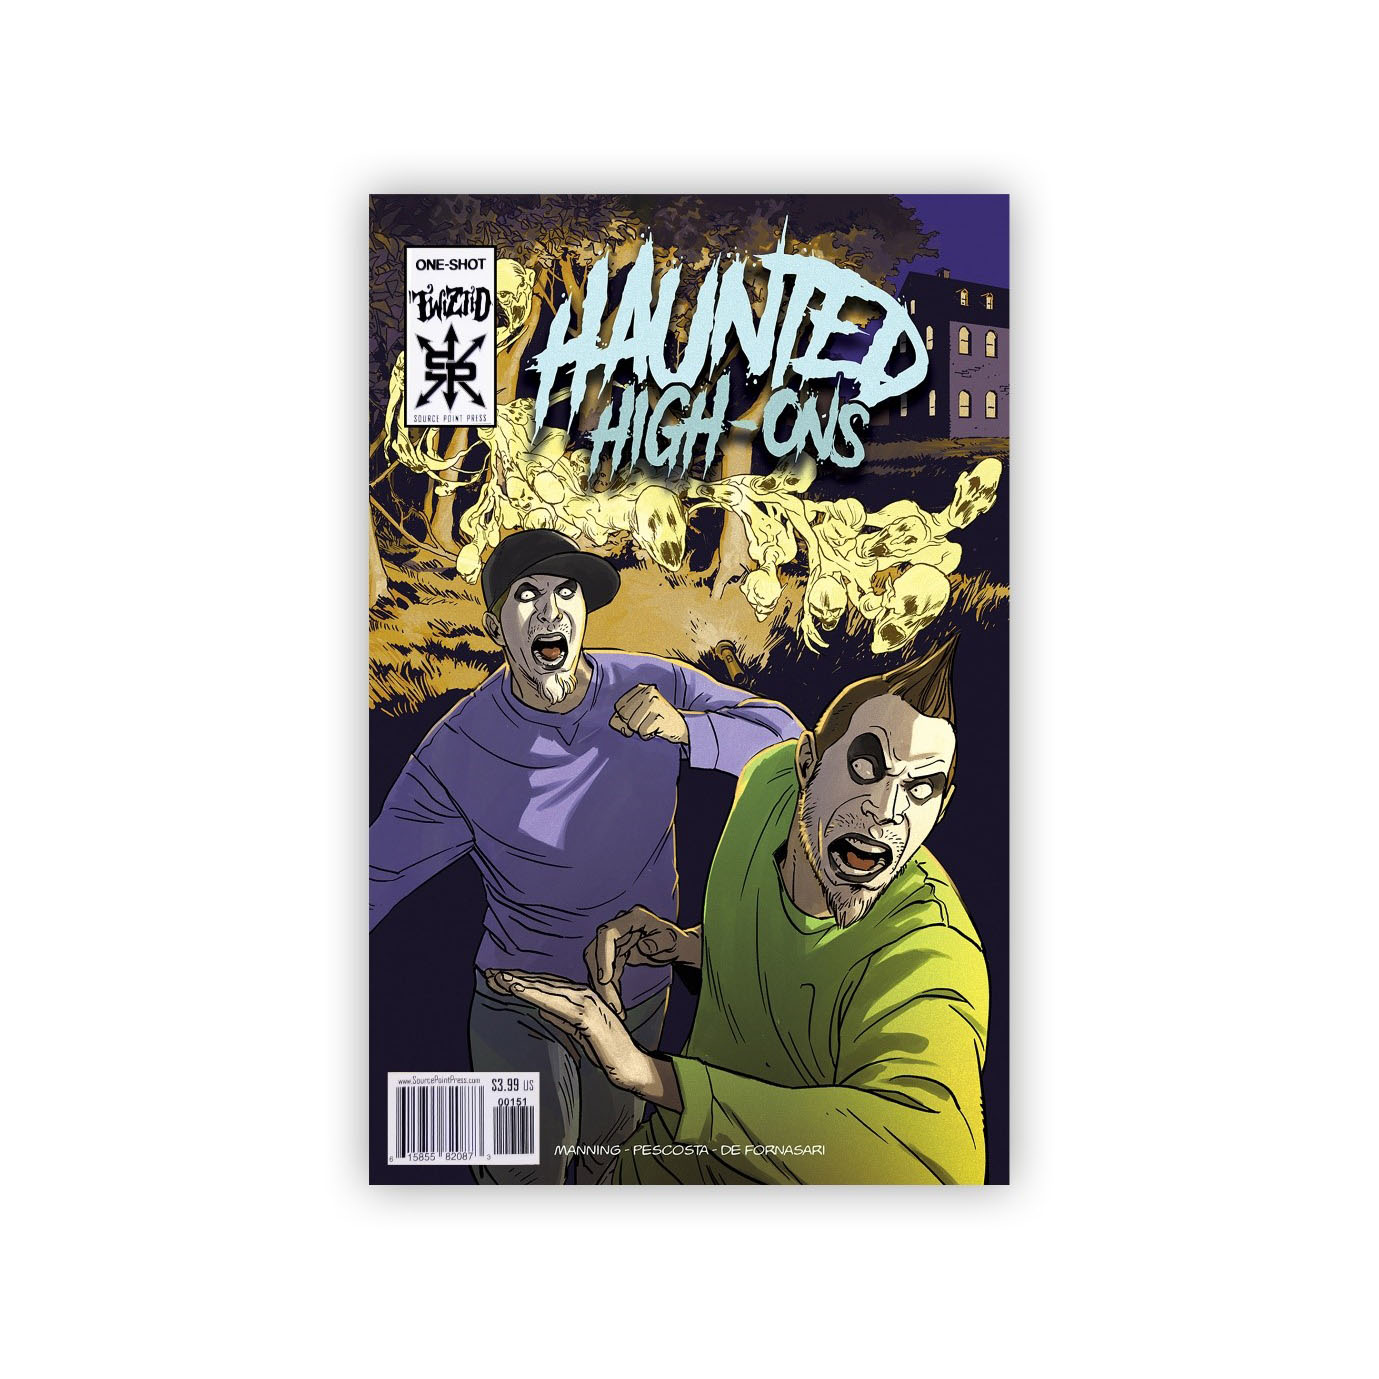 Twiztid's Haunted High-Ons Twiztidshop “Variant Cover” Comic Book